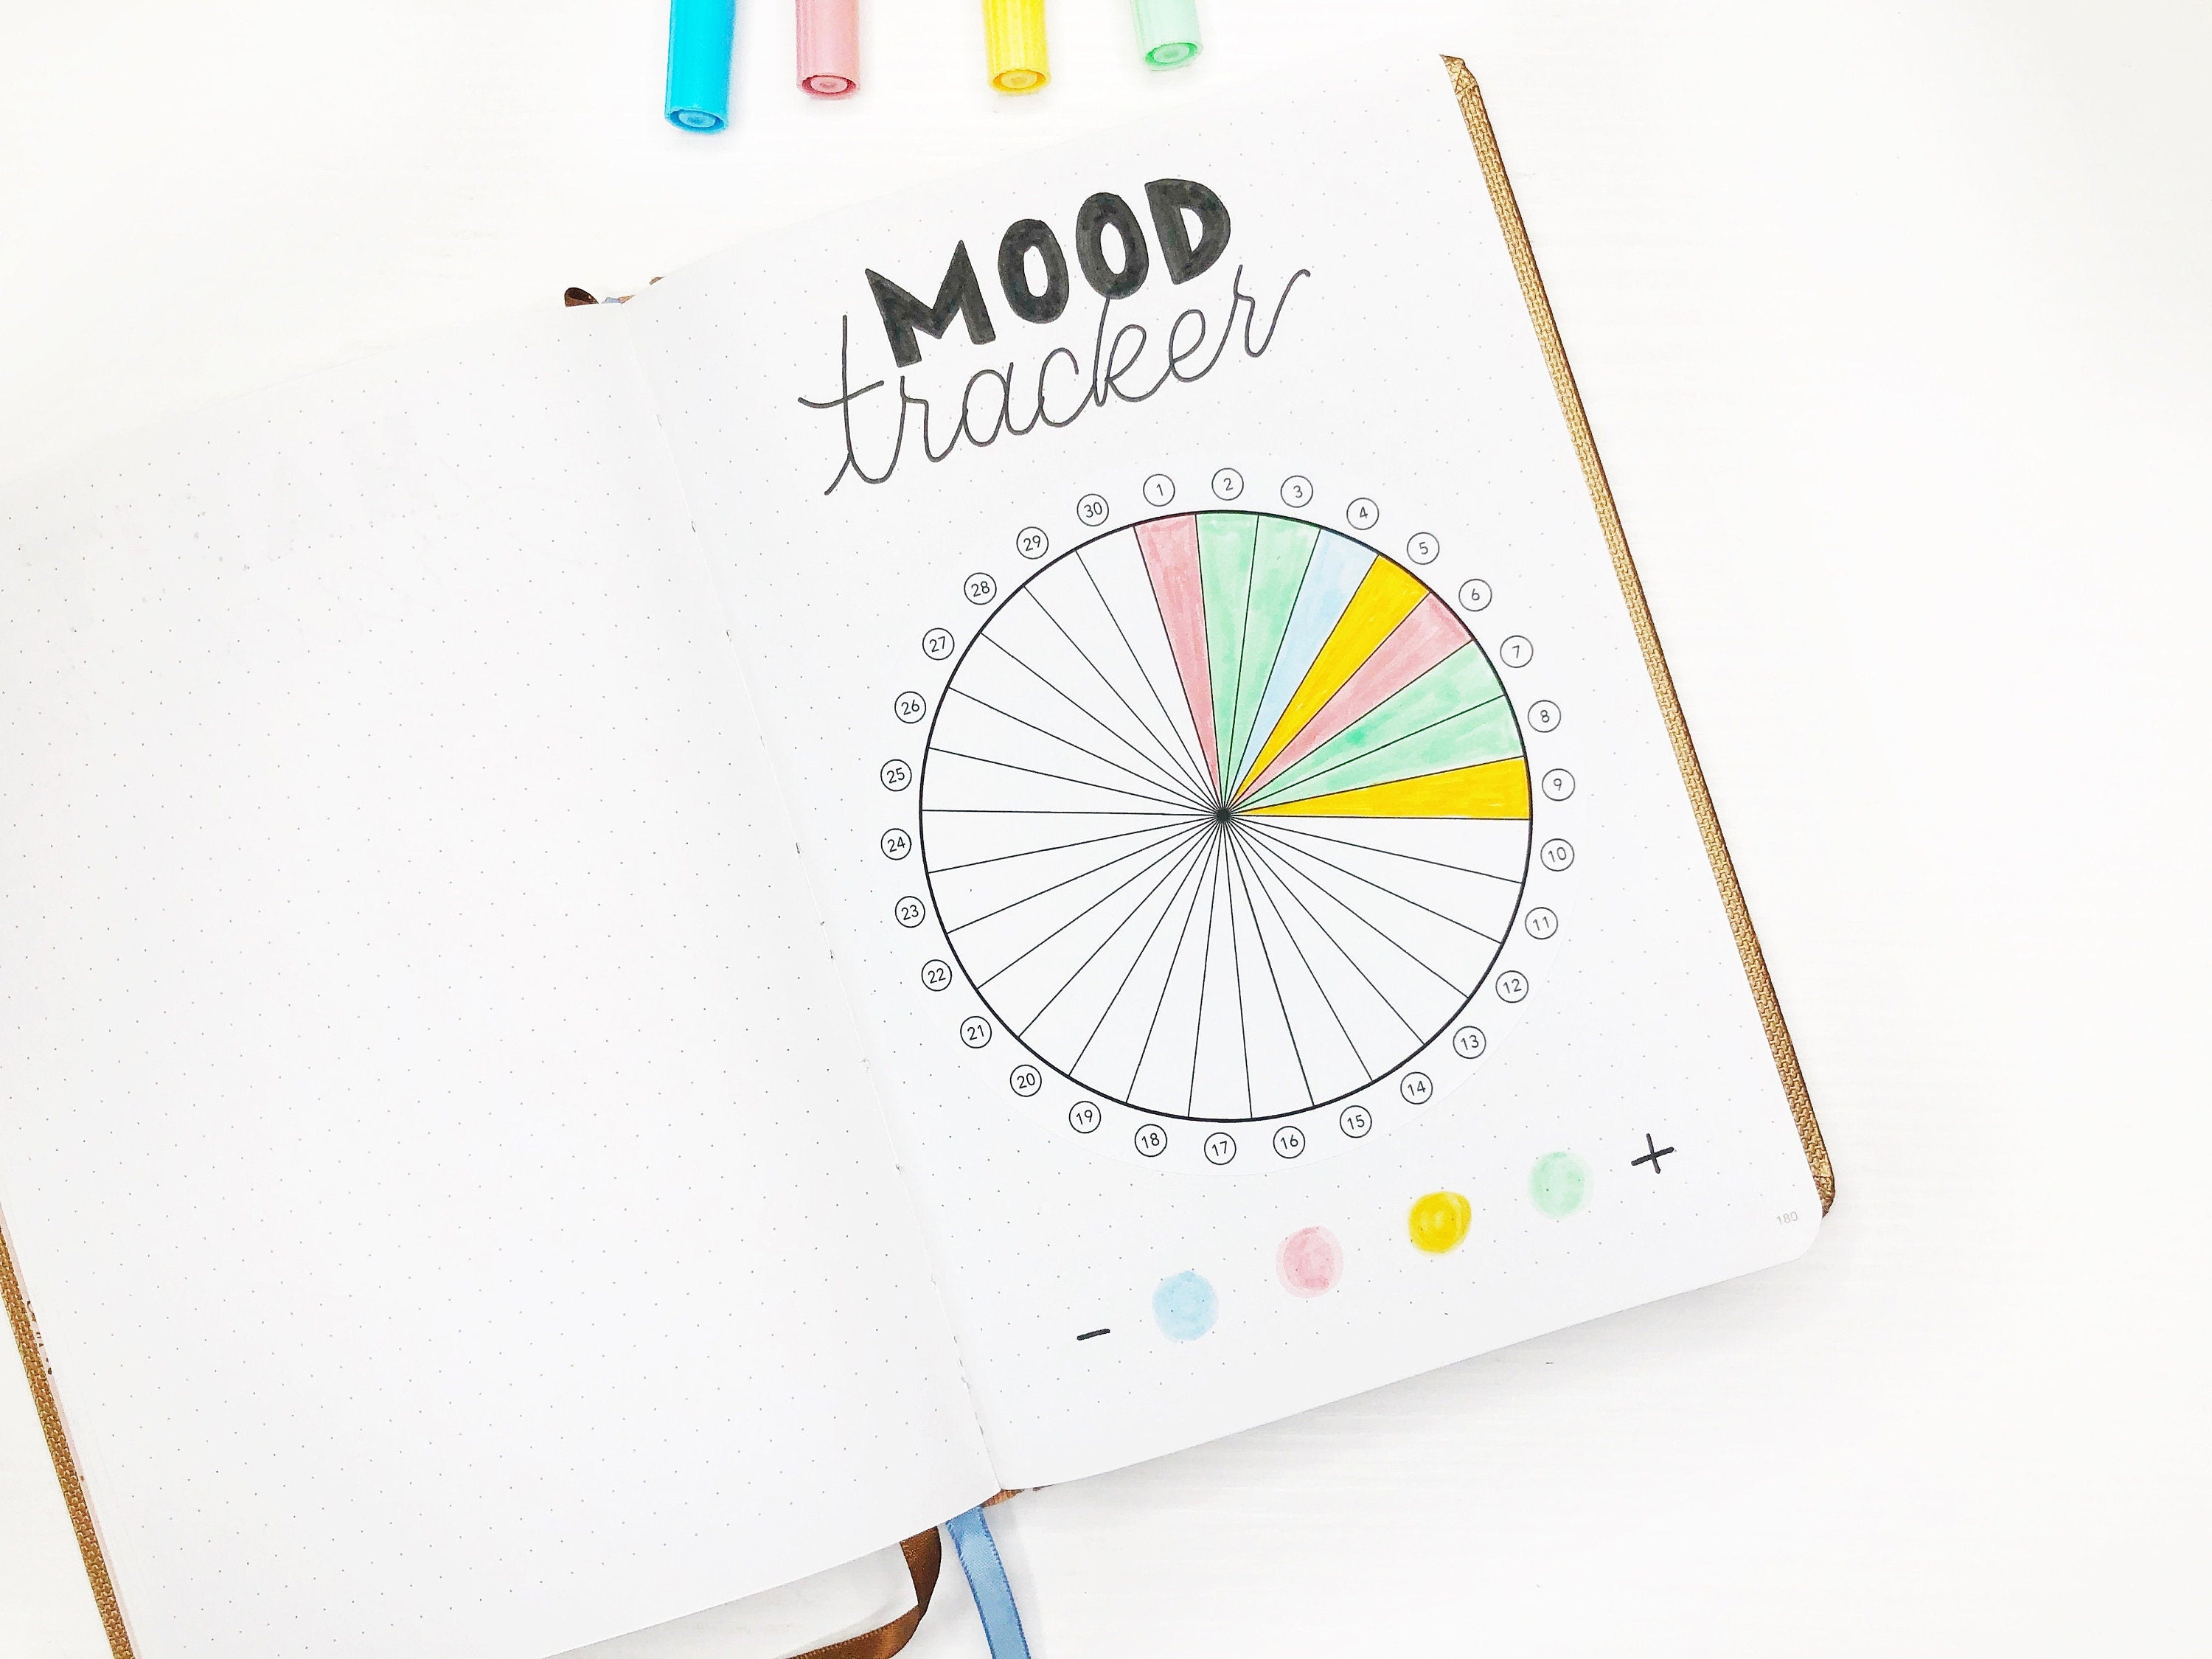  A5 Circle Mood Tracker Stickers in Green - 120 Pieces 5.3 x  8.3 - Craft Journal Snail Mail Planner Journal Diary Paper Sticker Sheet :  Office Products